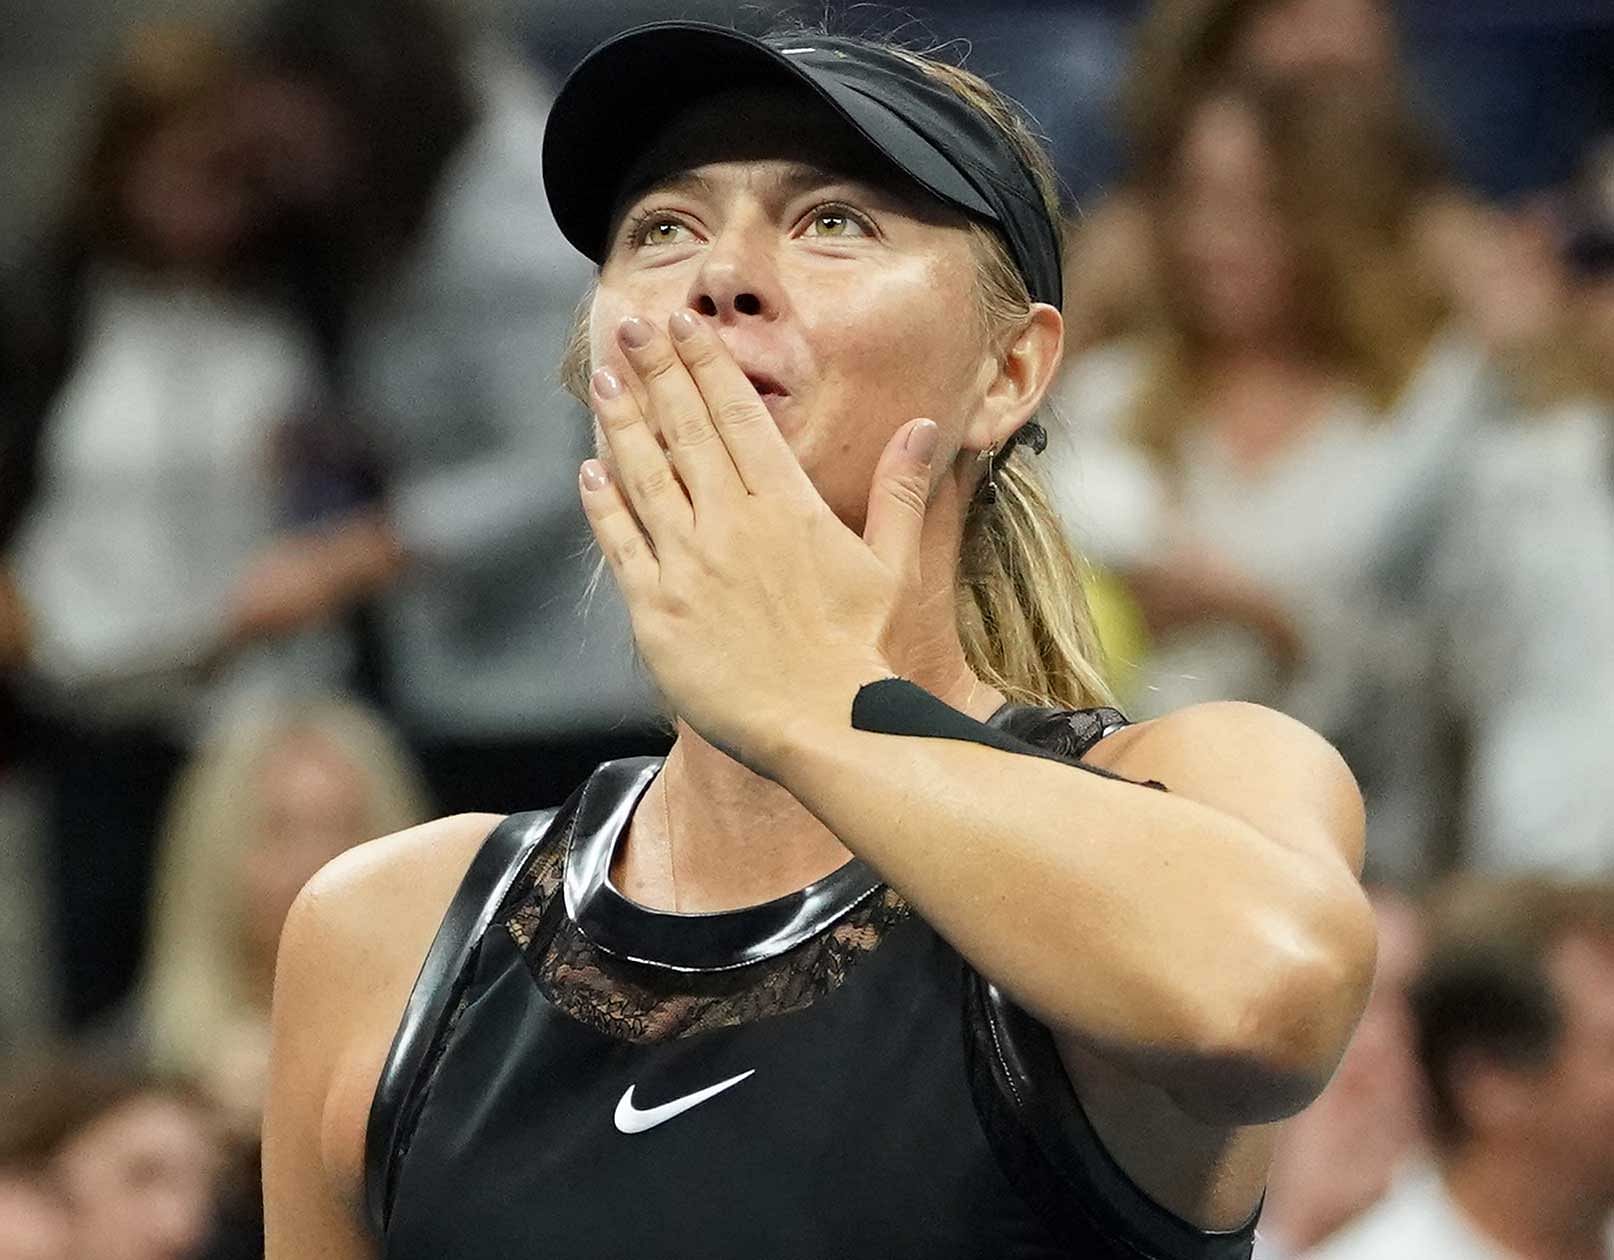 Three years after her last appearance at the All England Club, and 14 years since the Russian won the title, launching the giggling teenager into the financial and media stratosphere, Sharapova's career is at a crossroads. (Reuters file photo)